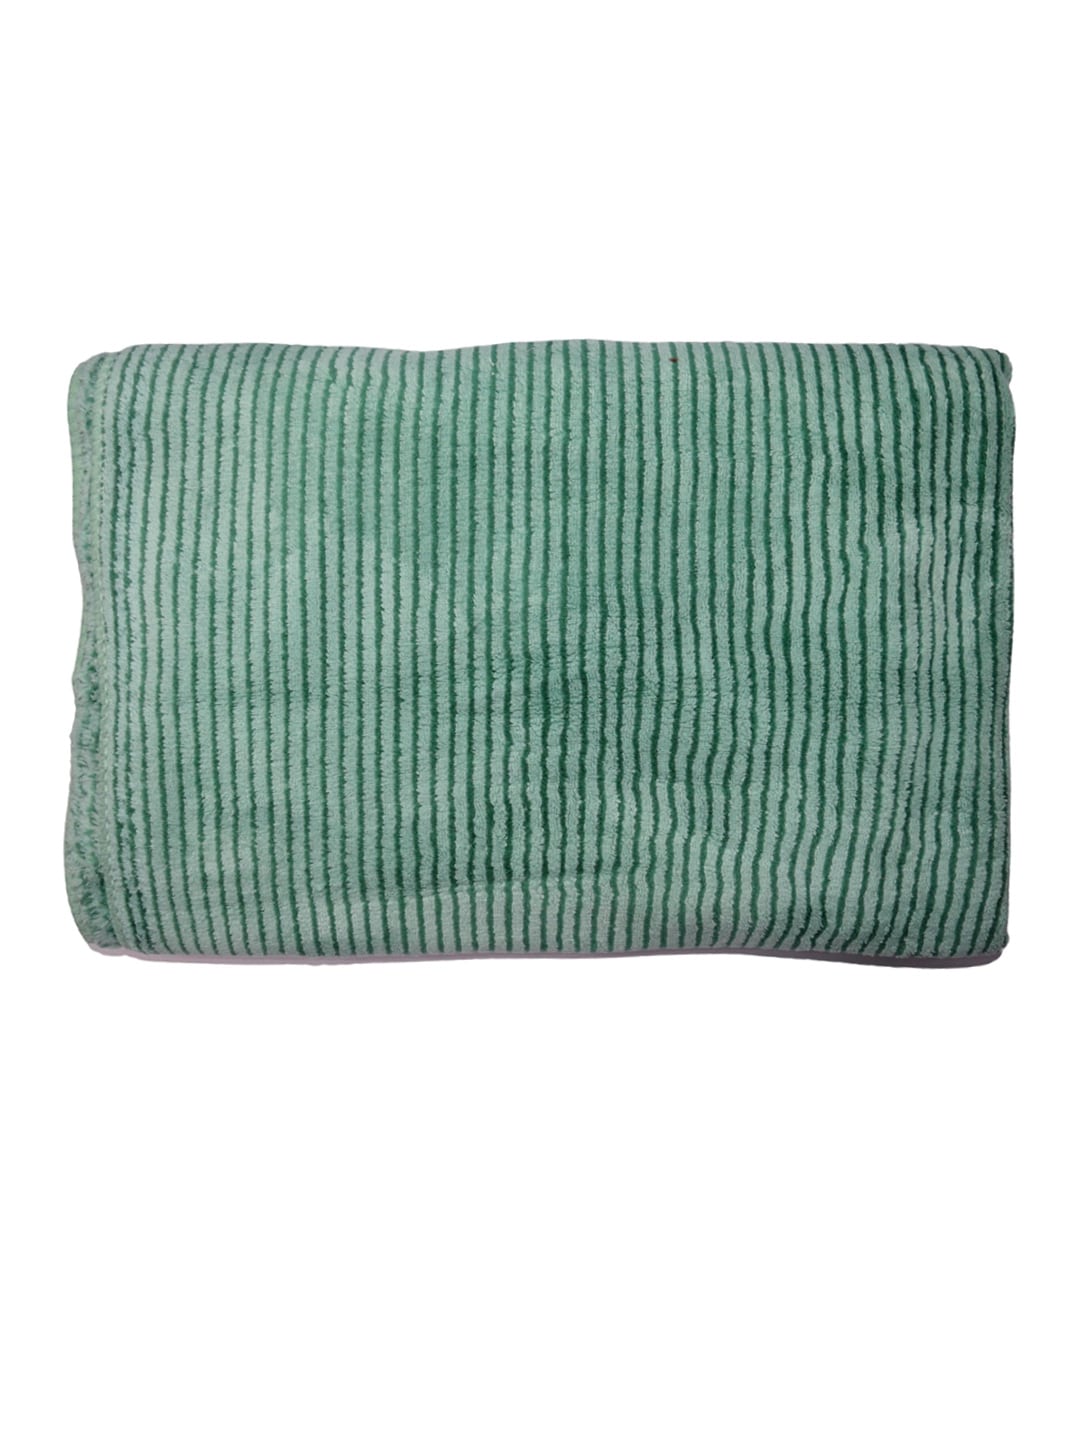 Tranquil square Green Striped 650 GSM Cotton Rectangular Bath Towels Price in India